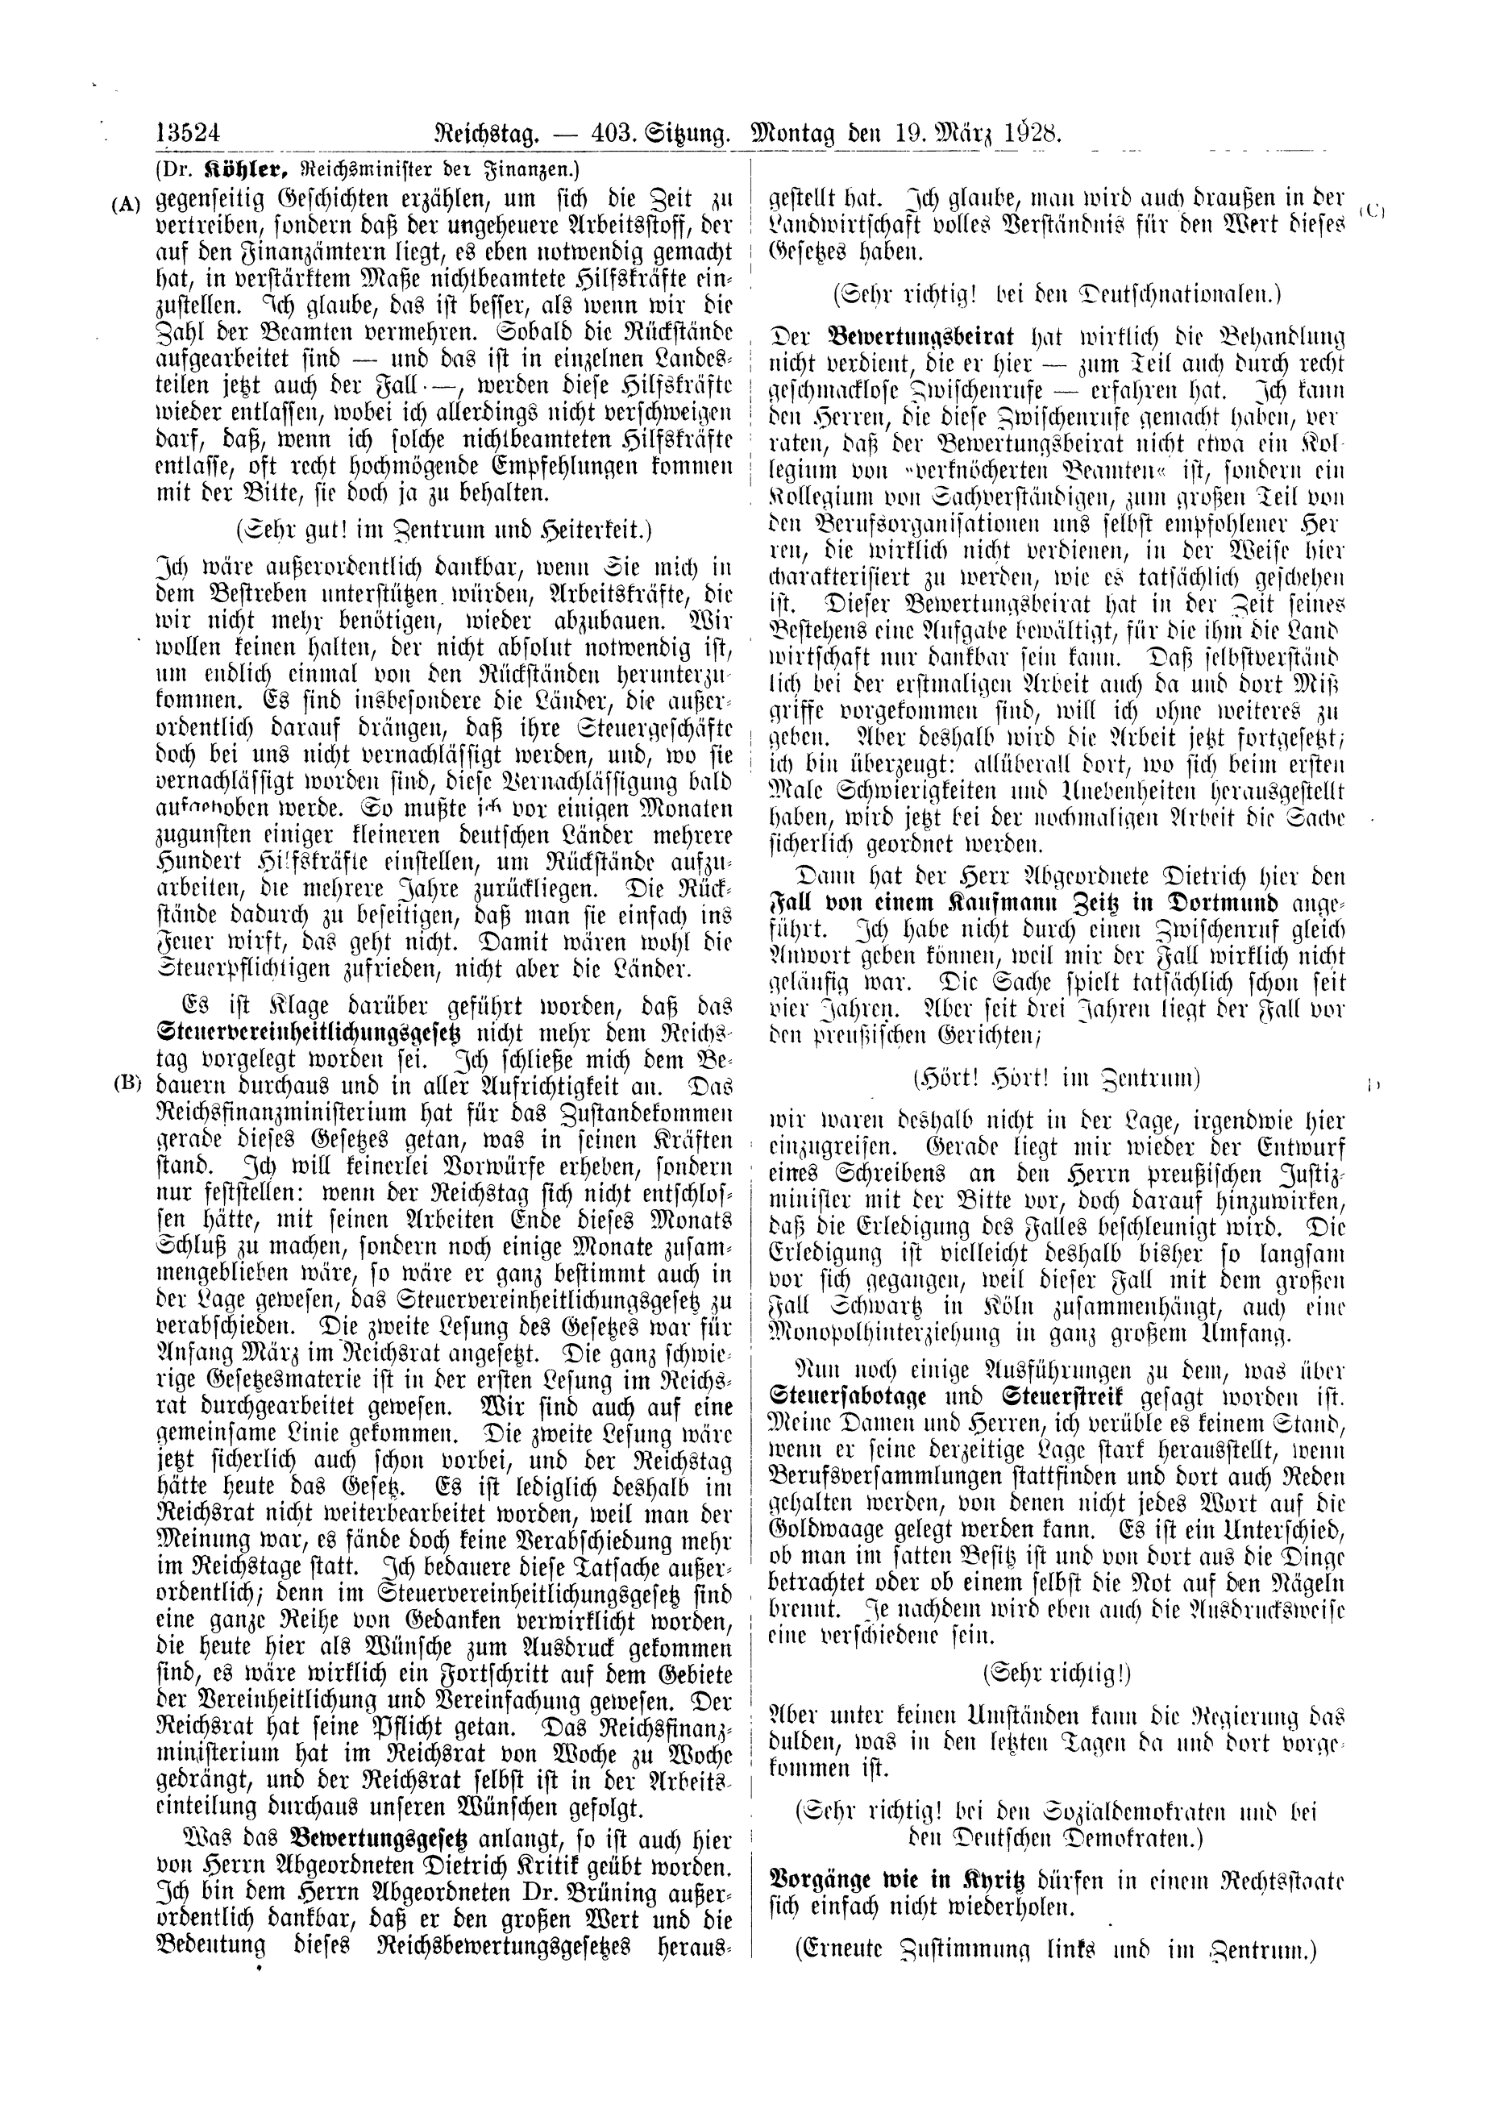 Scan of page 13524